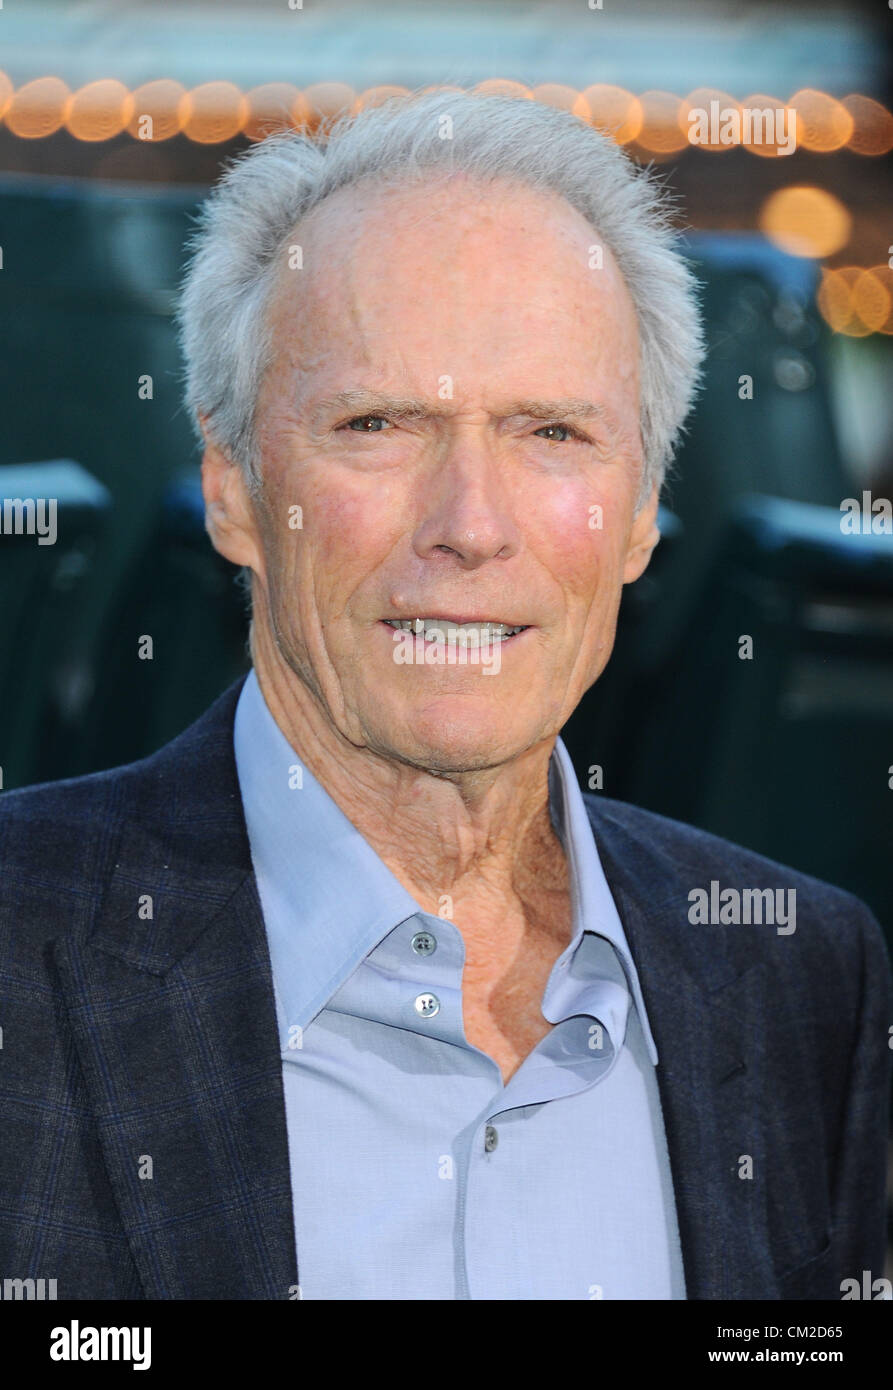 Clint Eastwood bei den "Trouble with the Curve" Filmpremiere in Los Angeles, CA 19. September 2012 Foto von Sydney Alford Stockfoto